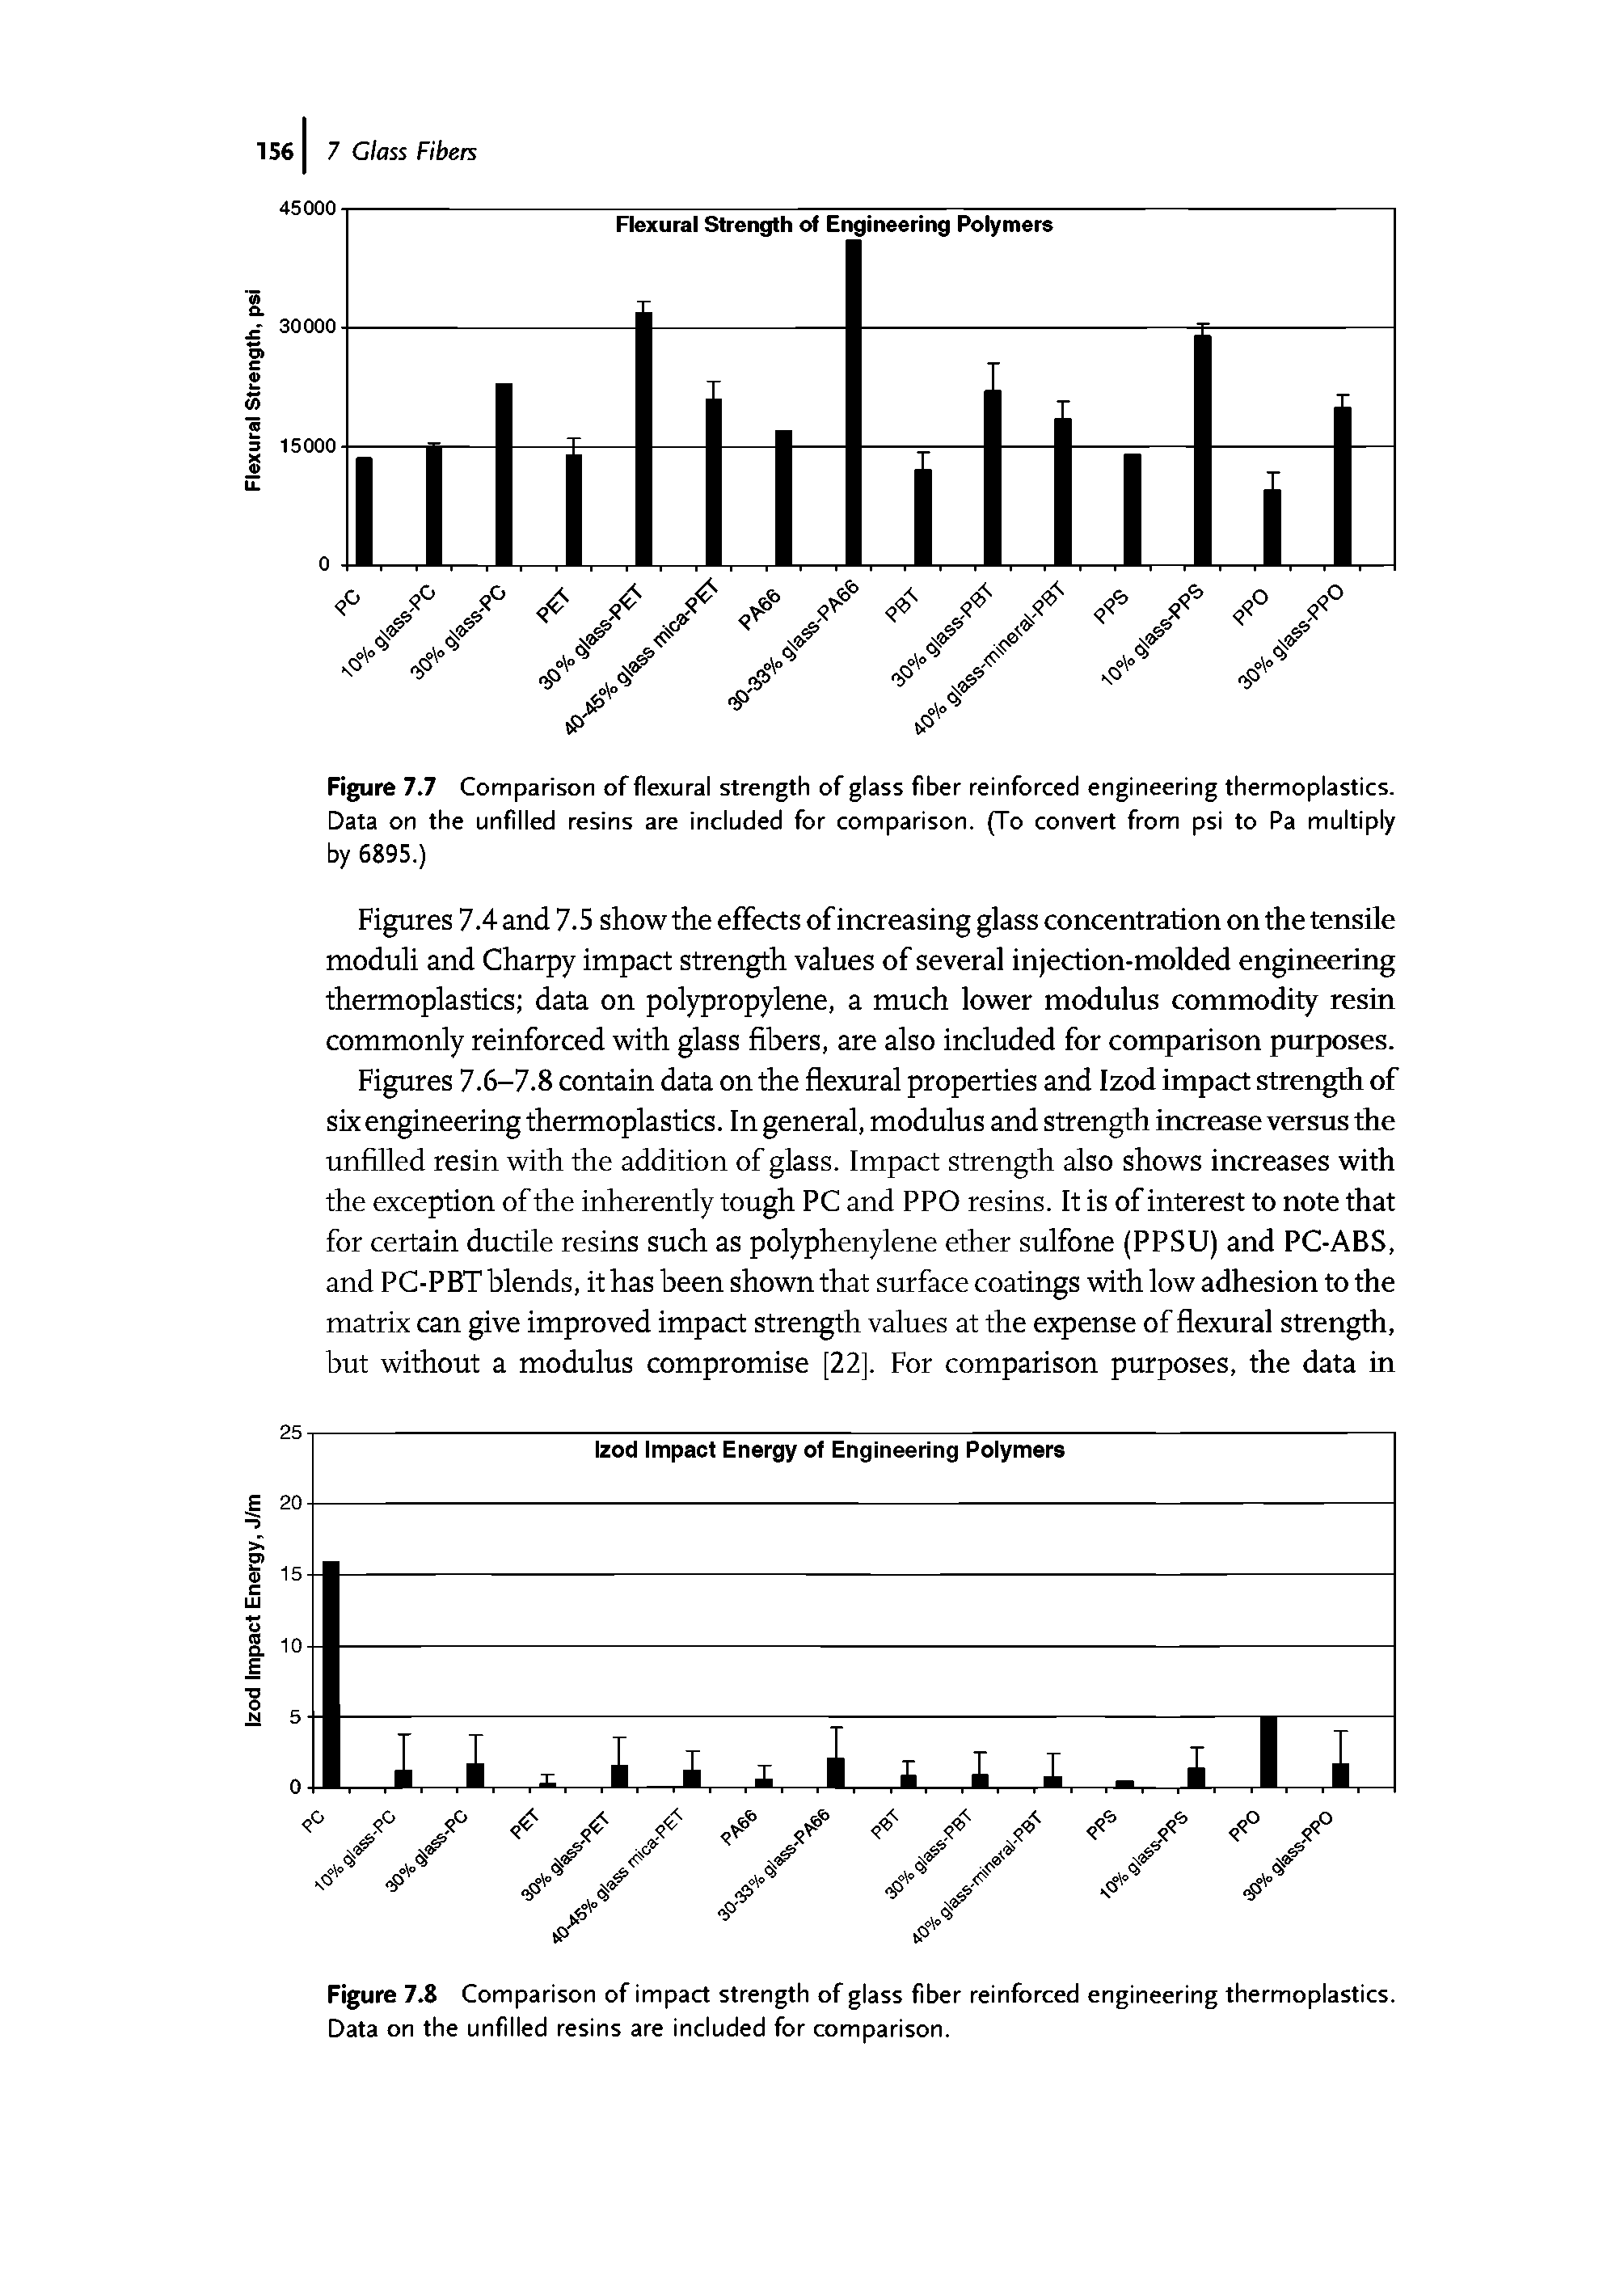 Figures 7.4 and 7.5 show the effects of increasing glass concentration on the tensile moduli and Charpy impact strength values of several injection-molded engineering thermoplastics data on polypropylene, a much lower modulus commodity resin commonly reinforced with glass fibers, are also included for comparison purposes.